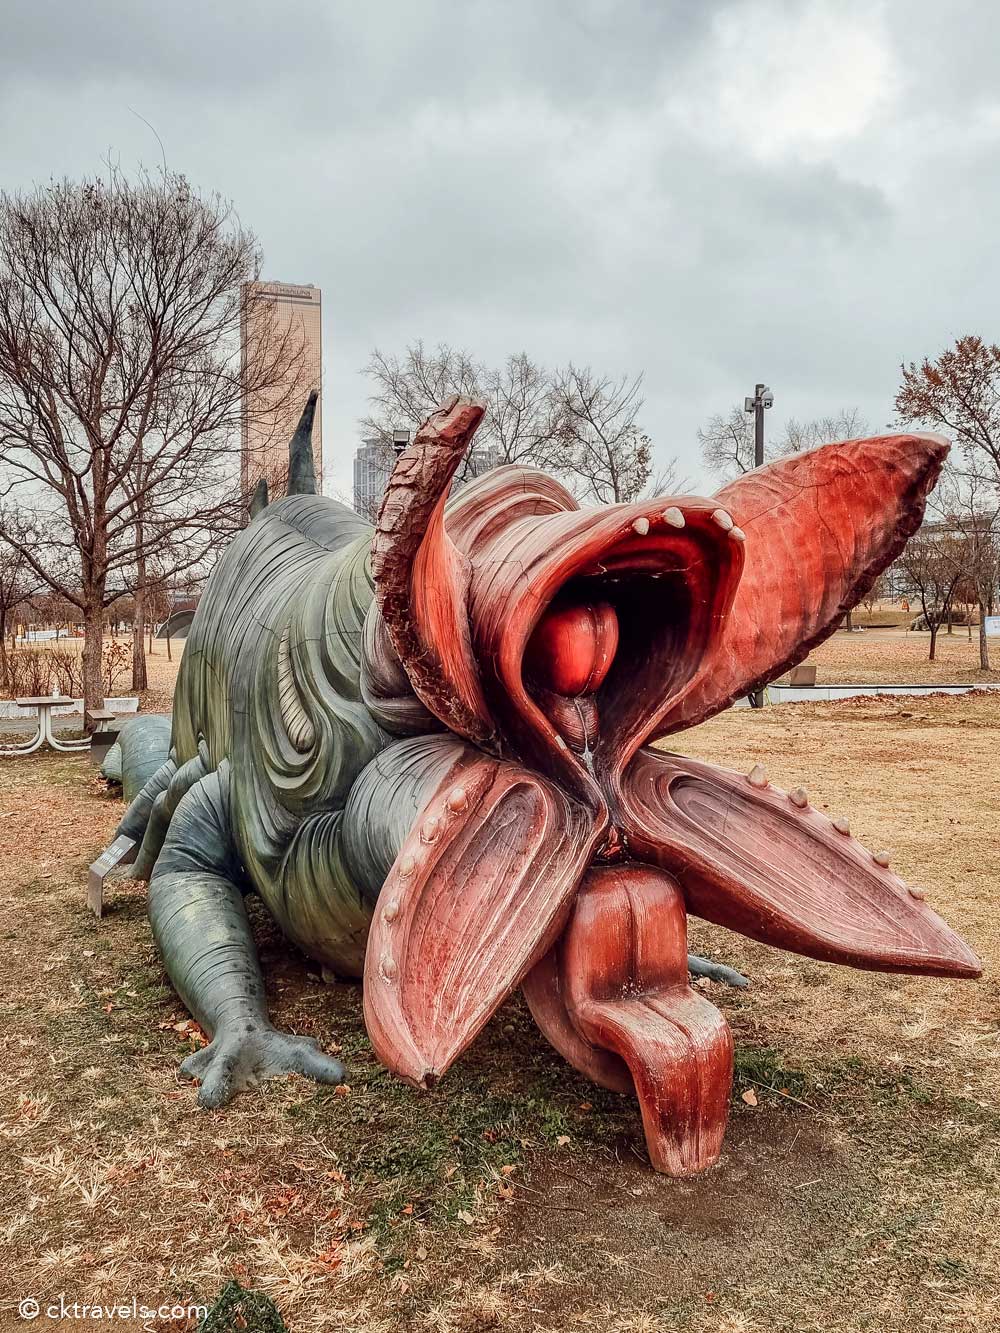 ‘The Host’ monster sculpture by the River Han In Seoul - Unique, Weird and Wonderful Seoul Attractions